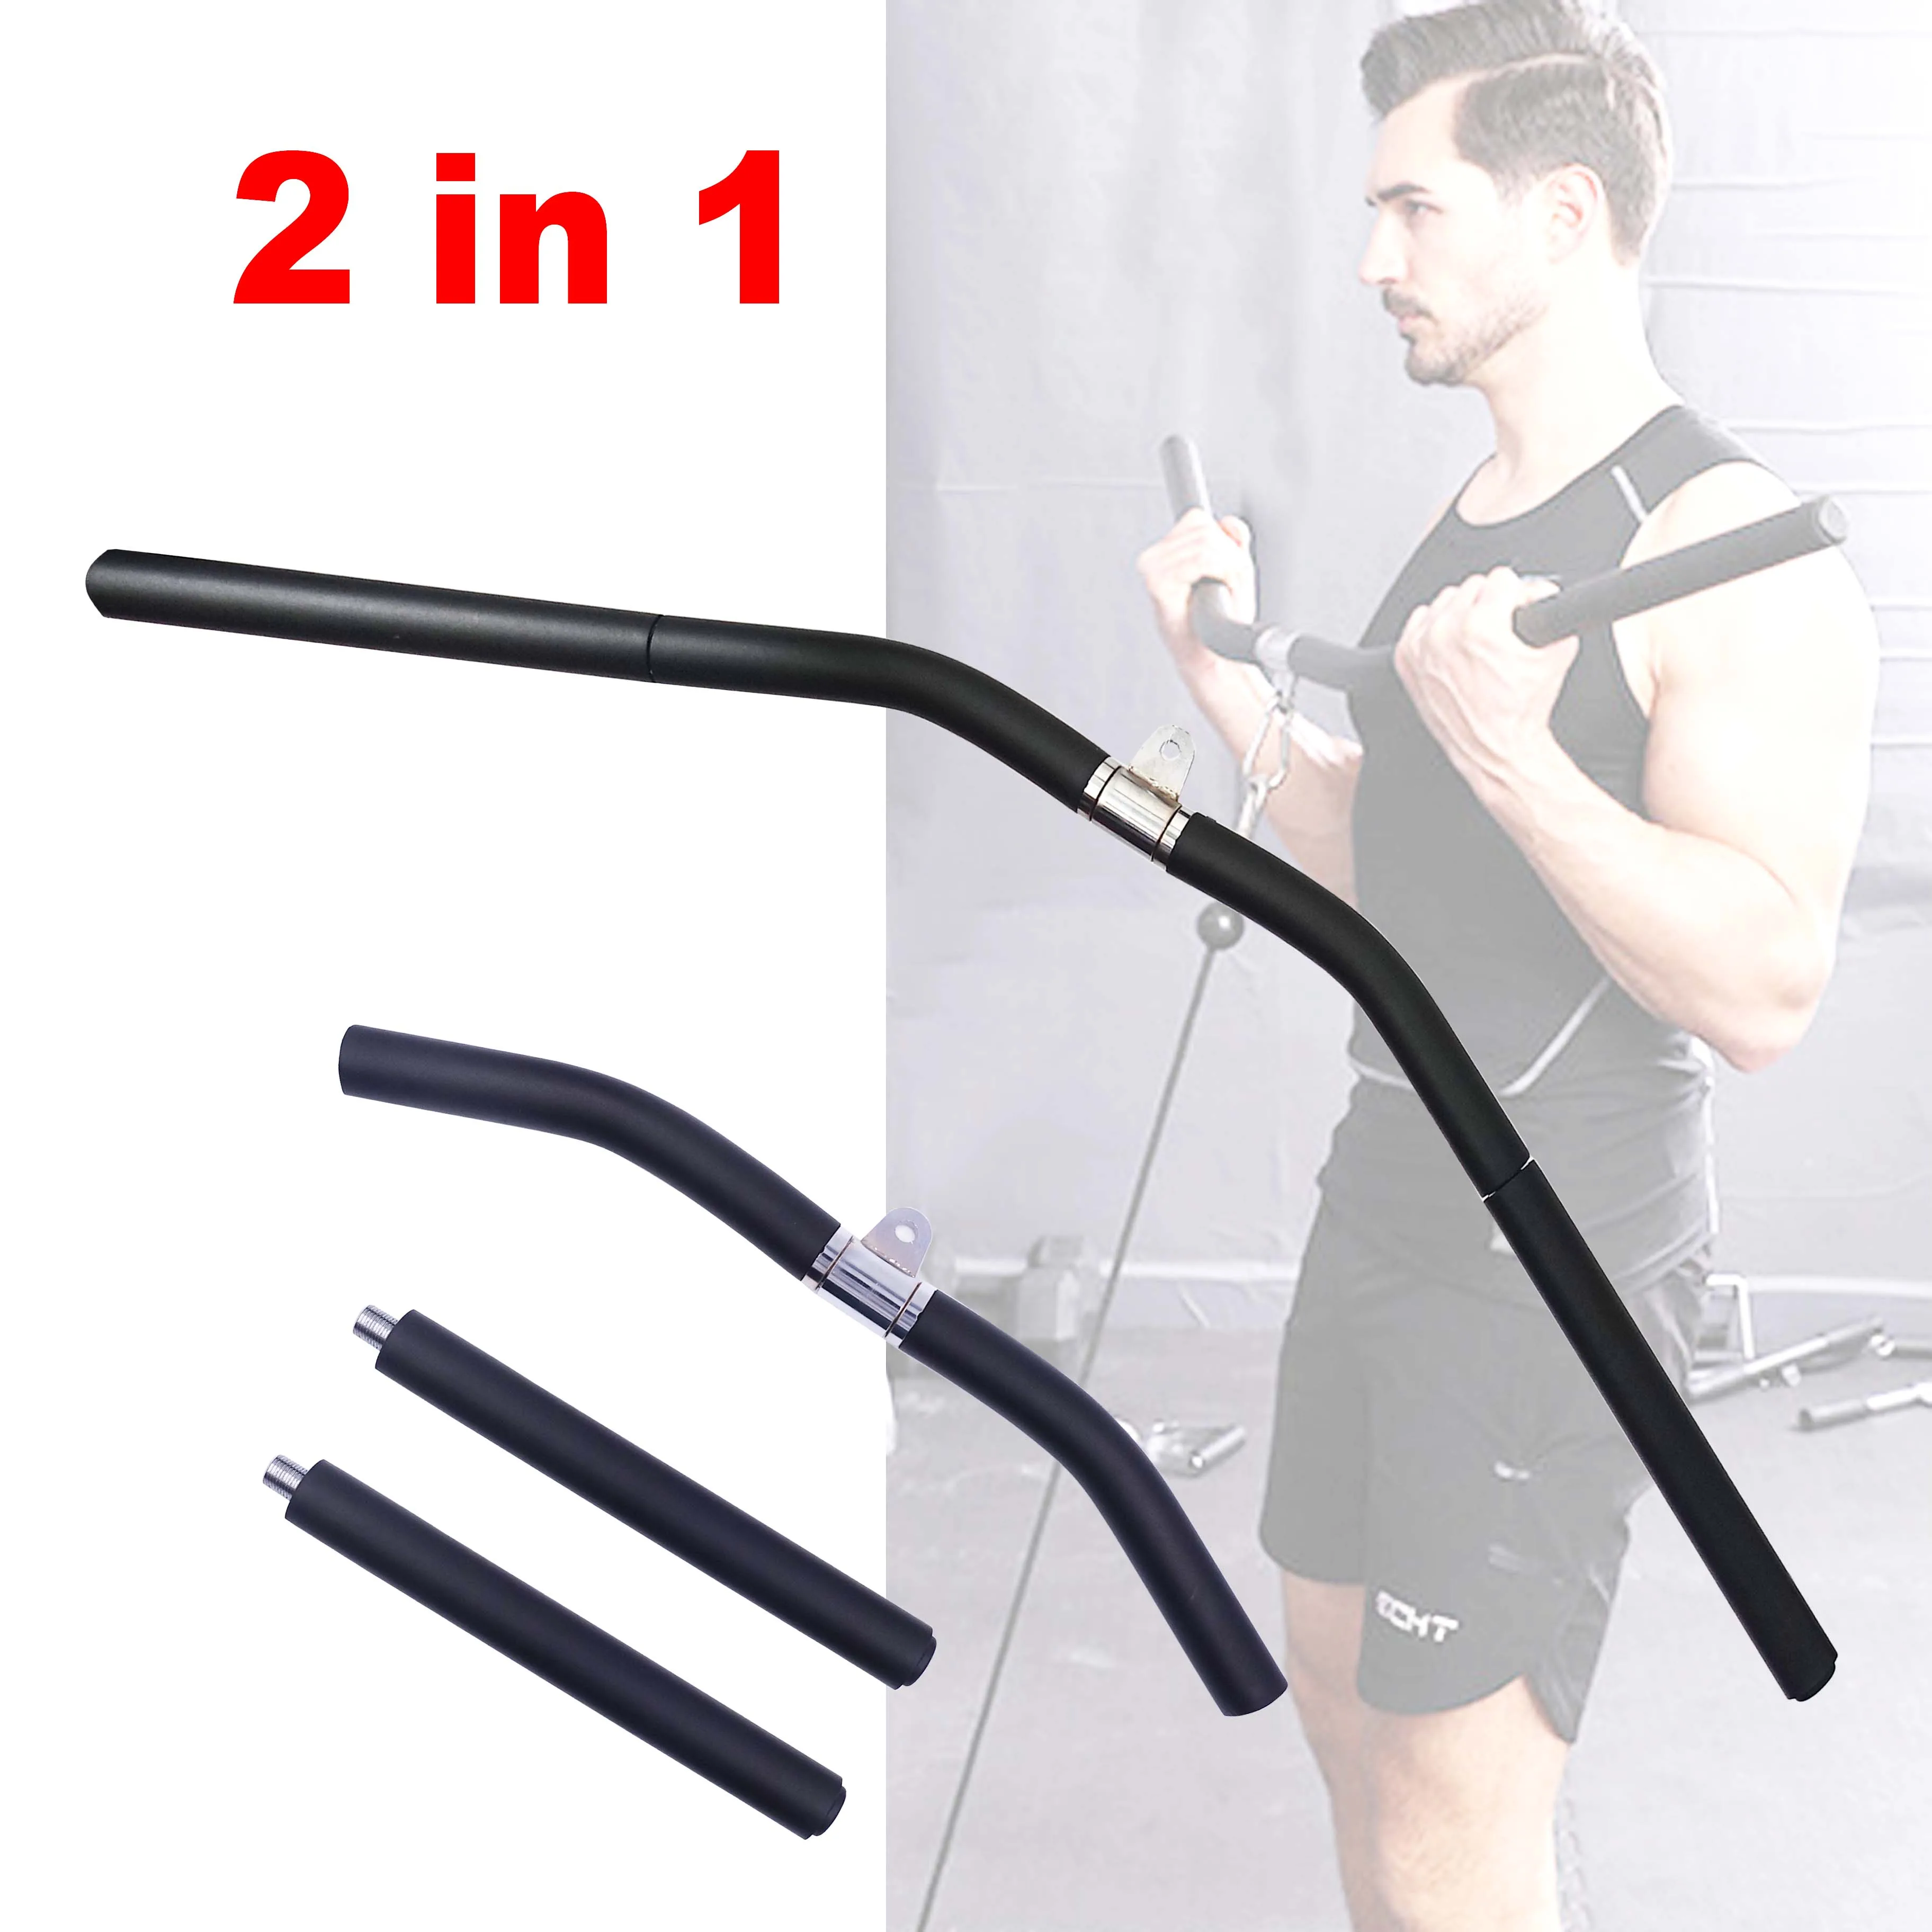 

Fitness Rotation LAT Pull Down Curl Bar Tricep Back Muscles Strength Workout for Cable Machine Attachment Rowing Training Handle